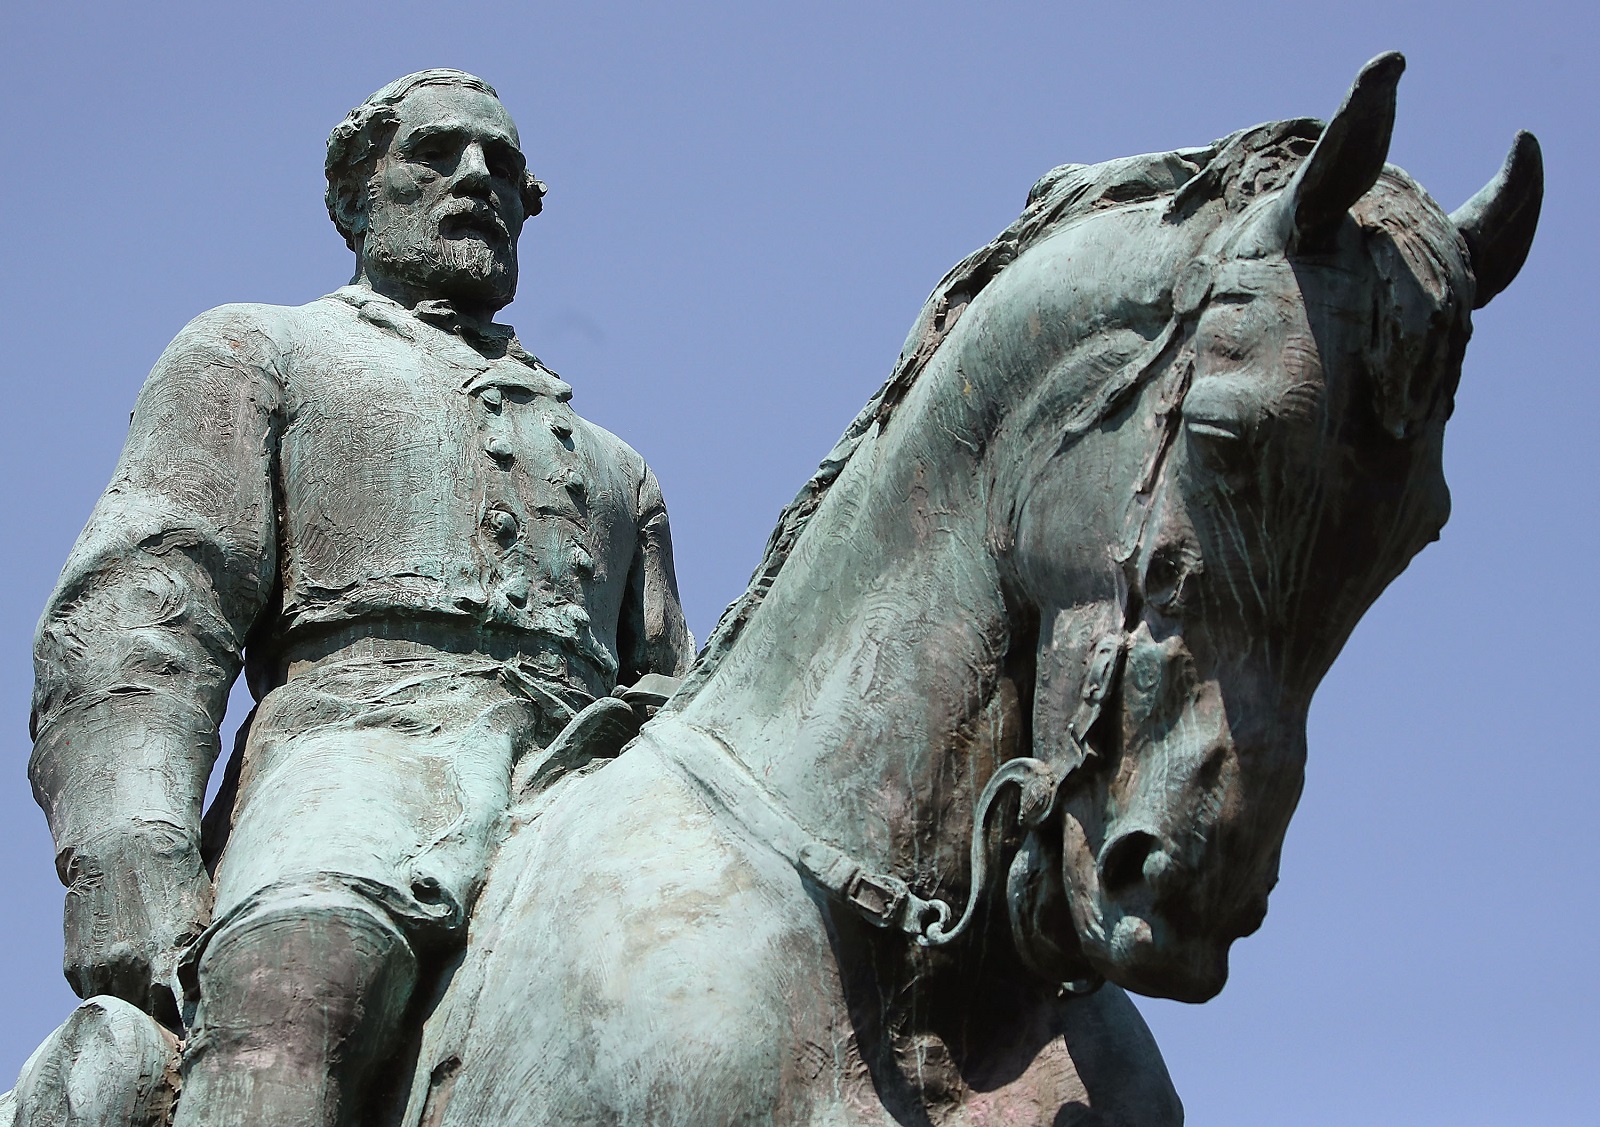 CHARLOTTESVILLE, VA - AUGUST 22:  The statue of Confederate Gen. Robert E. Lee stands in the center of the renamed Emancipation Park on August 22, 2017 in Charlottesville, Virginia. A decision to remove the statue caused a violent protest by white nationalists, neo-Nazis, the Ku Klux Klan and members of the 'alt-right'.  (Photo by Mark Wilson/Getty Images)